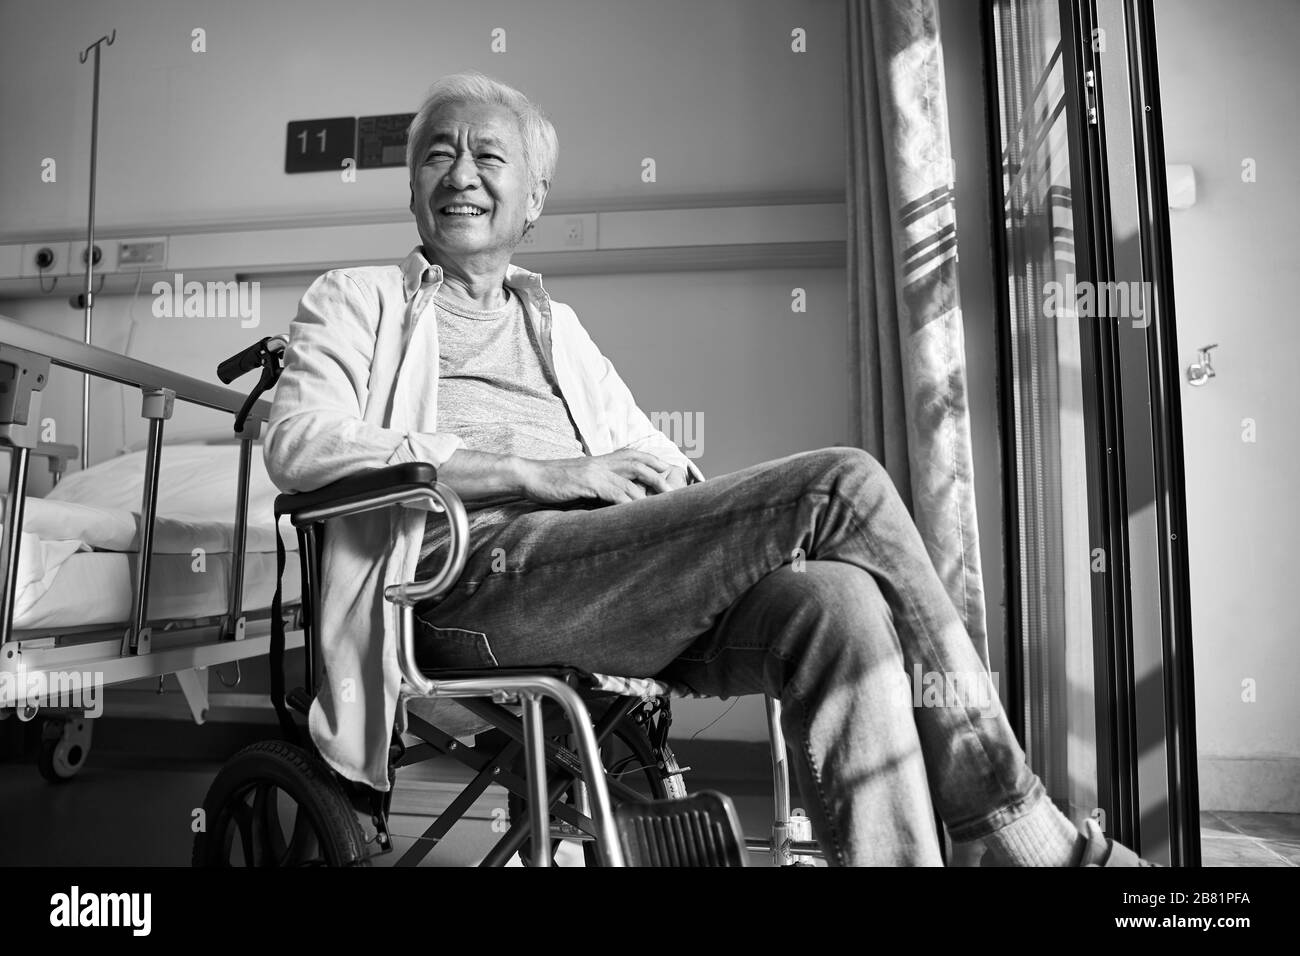 happy and content asian old man sitting in wheel chair in nursing home or hospital ward, black and white Stock Photo